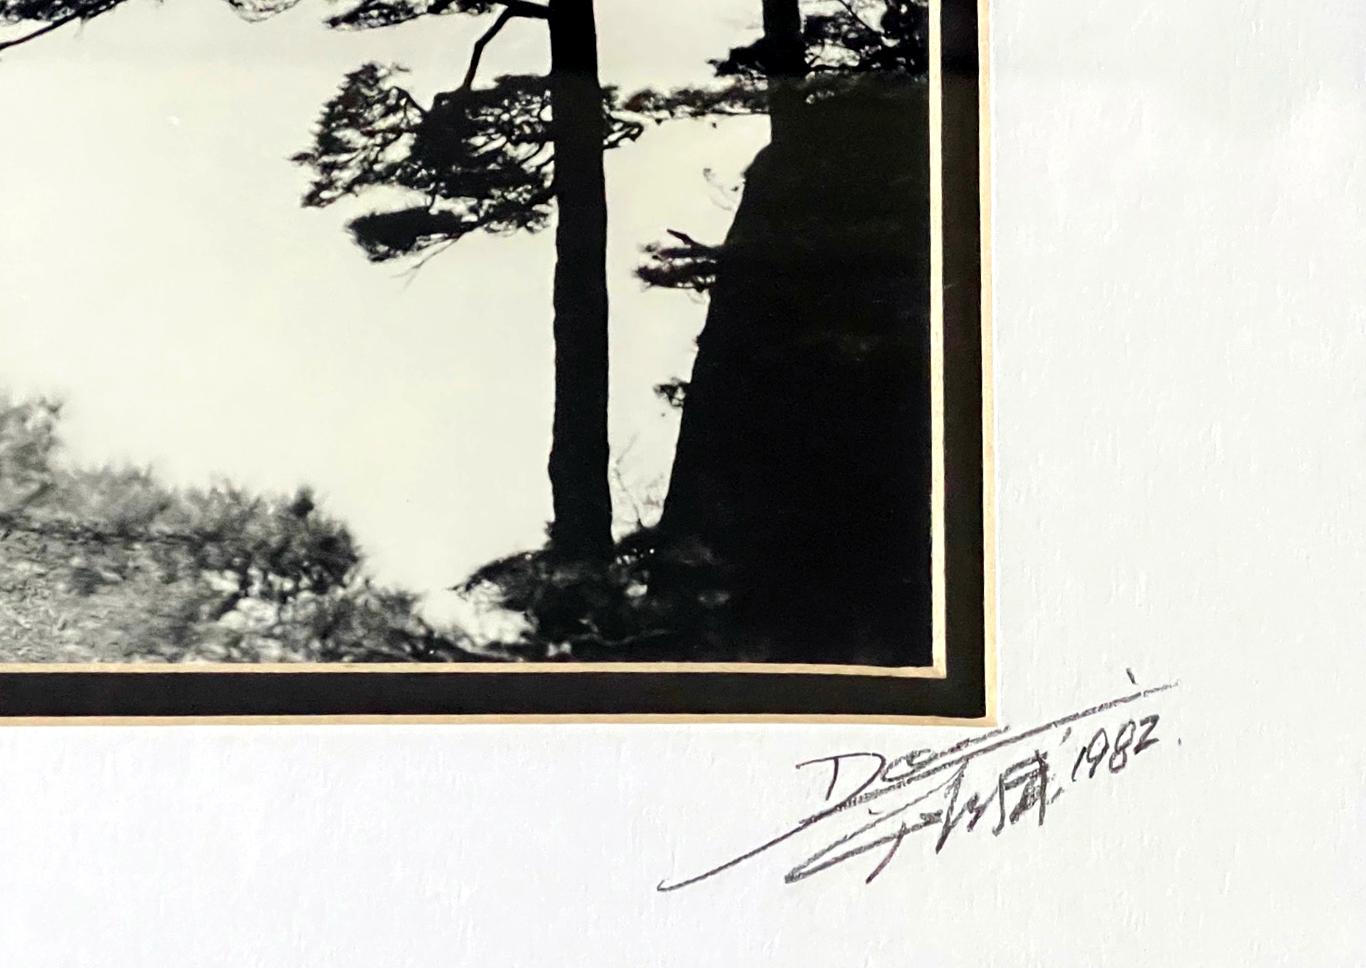 American Framed Photograph by Don Hong-Oai For Sale